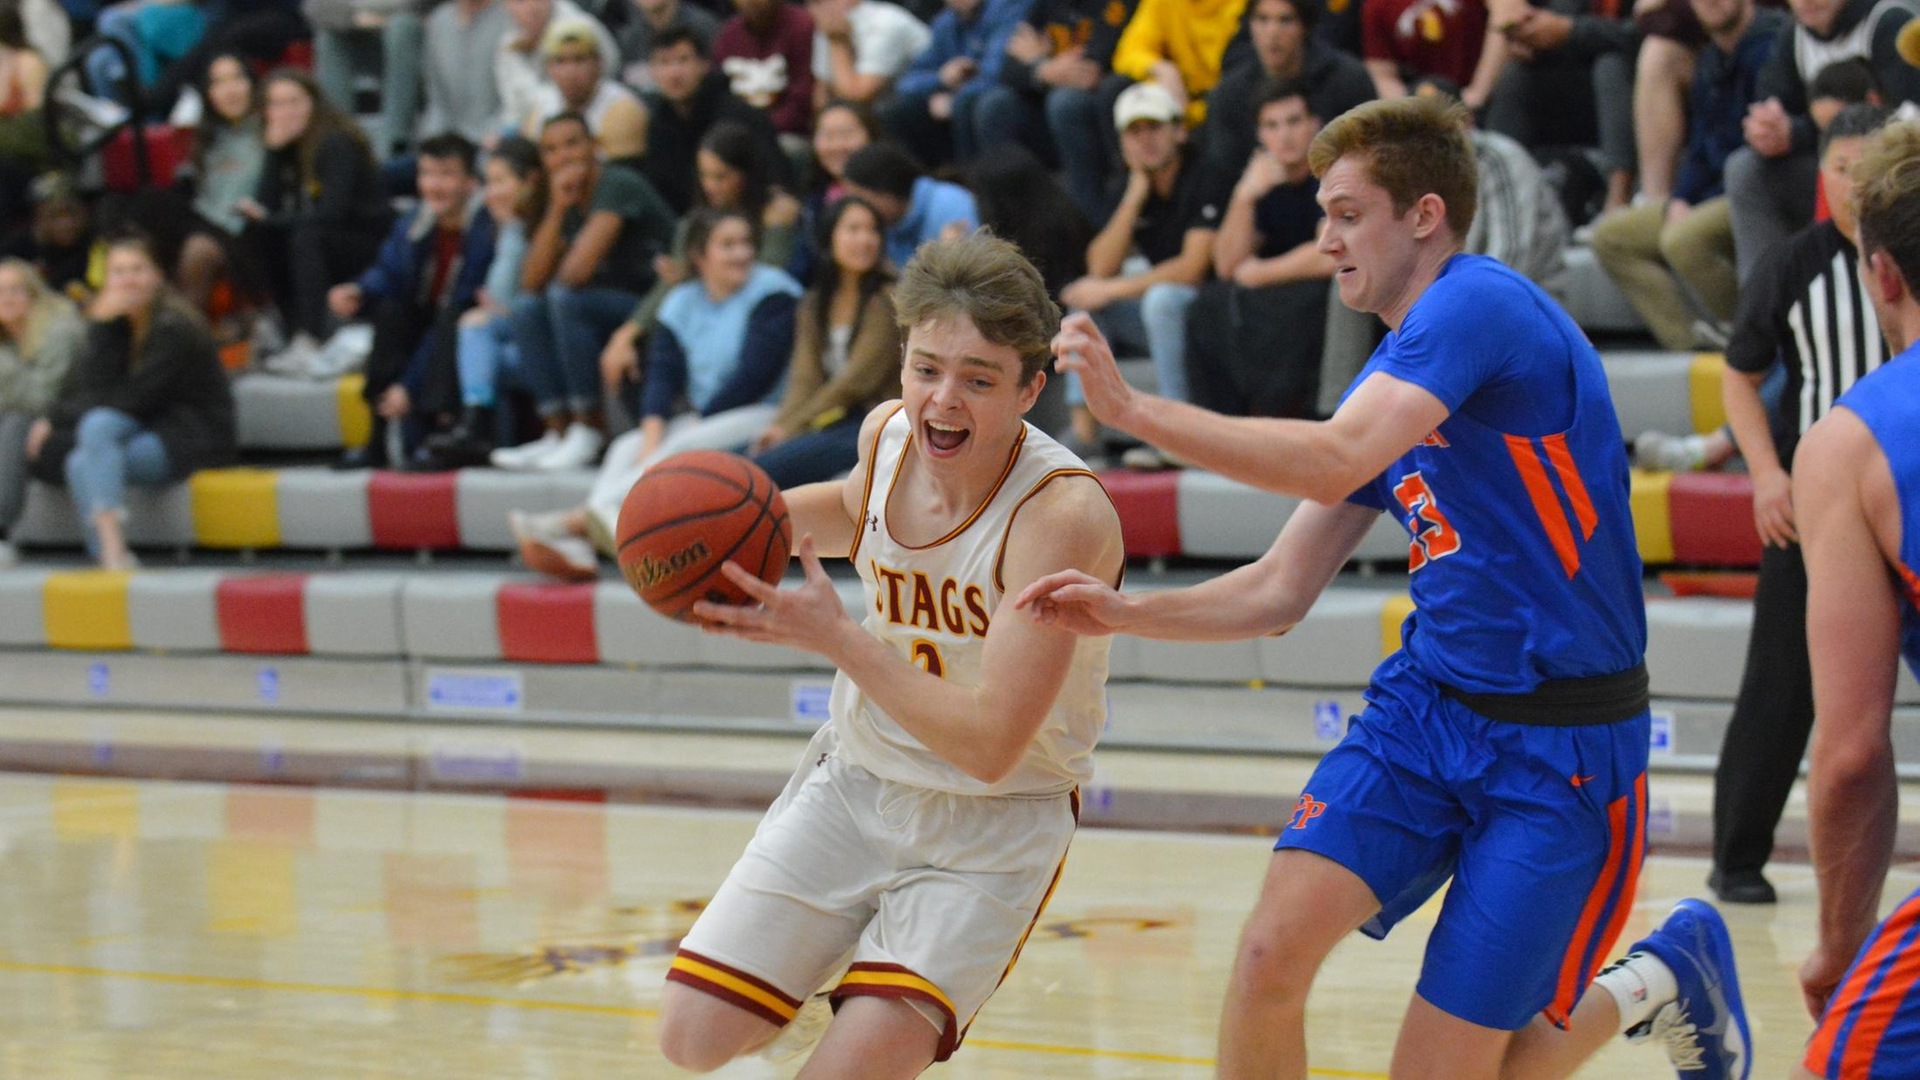 Josh Angle shattered his previous career high of 15 points against Pomona-Pitzer